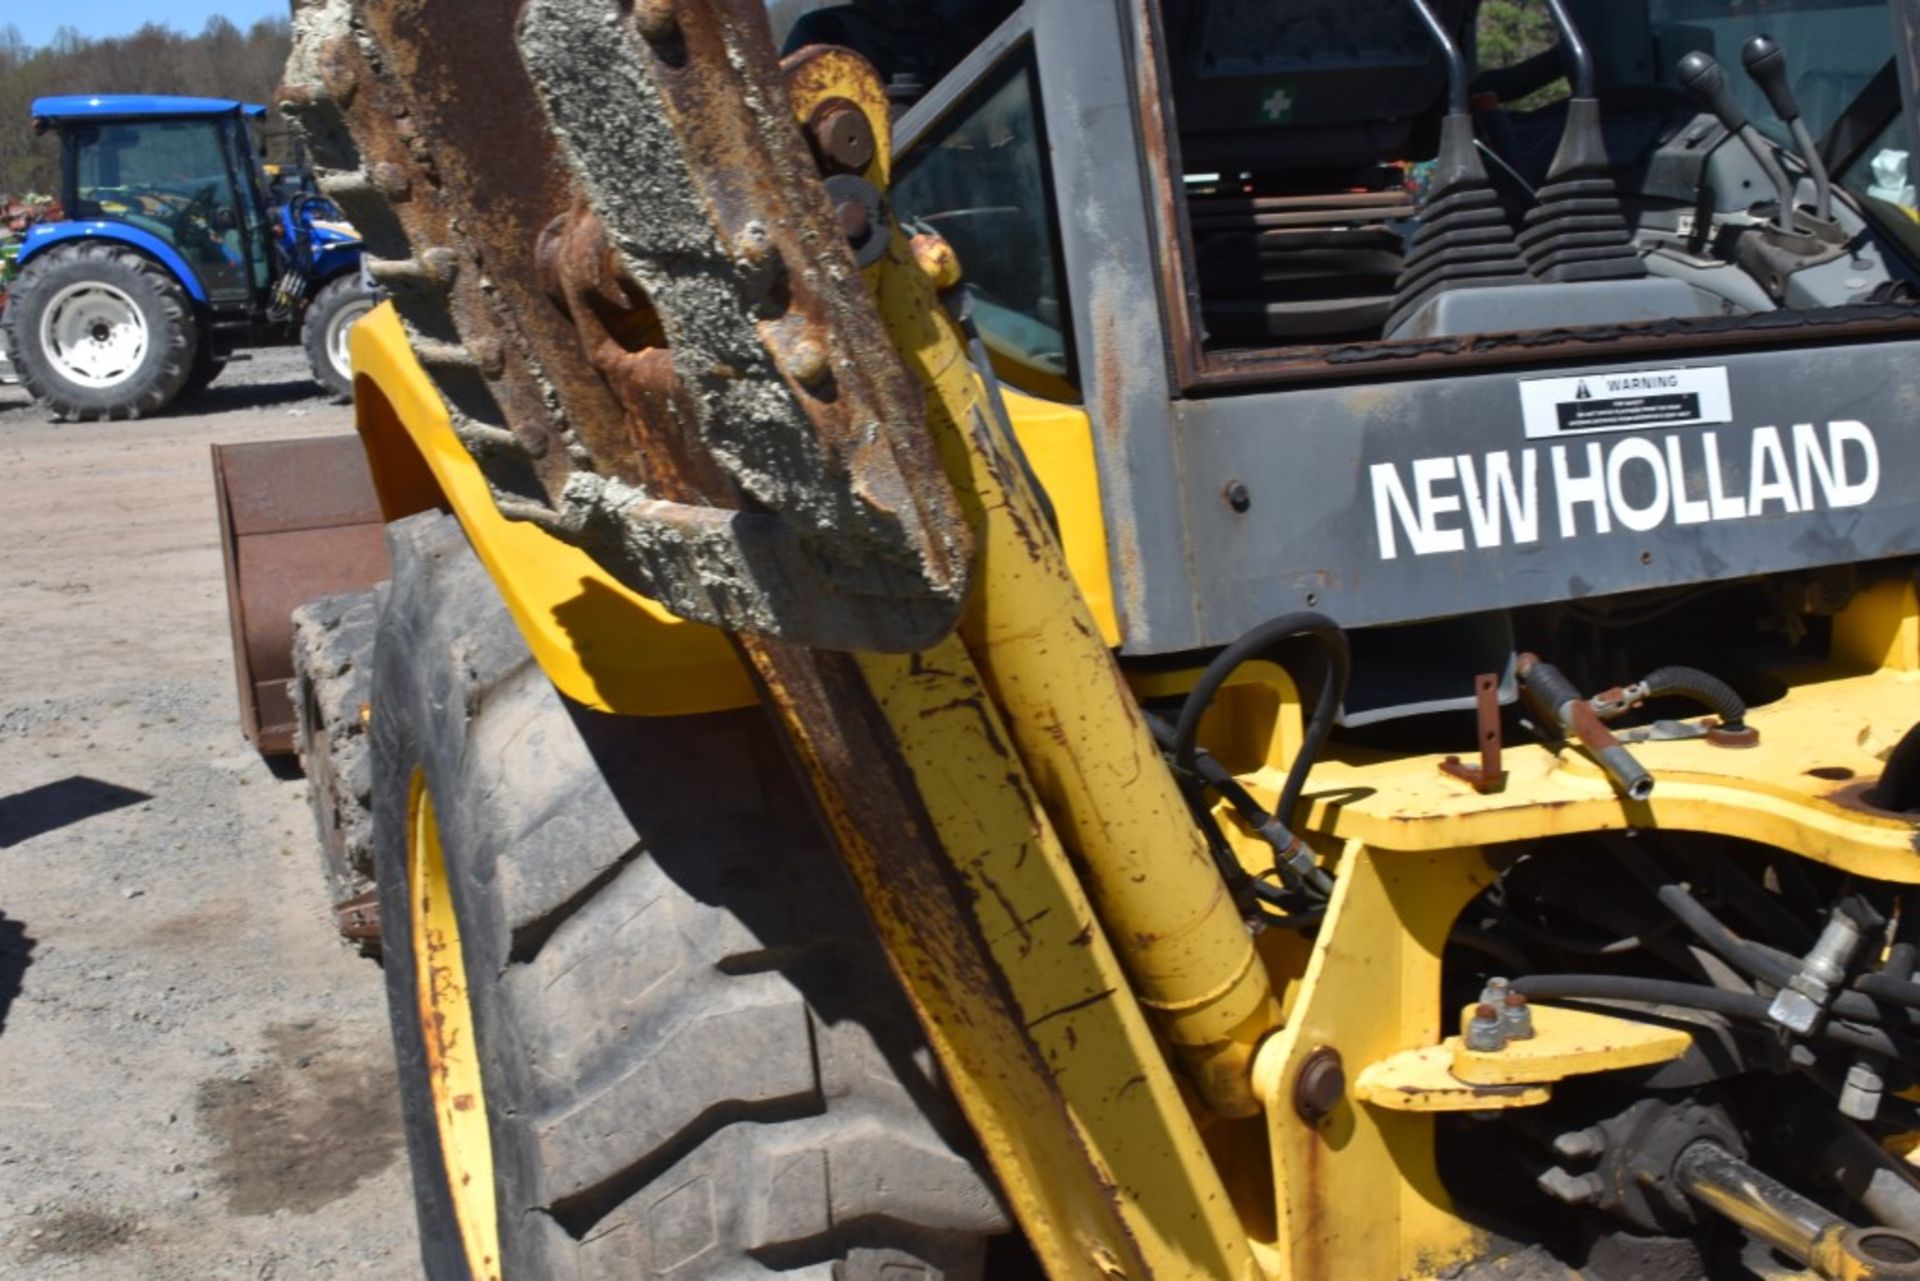 New Holland LB75B Backhoe 8052 Hours, Runs and Operates, 88" Bucket, 4WD, Outriggers, No Backhoe, - Image 8 of 24